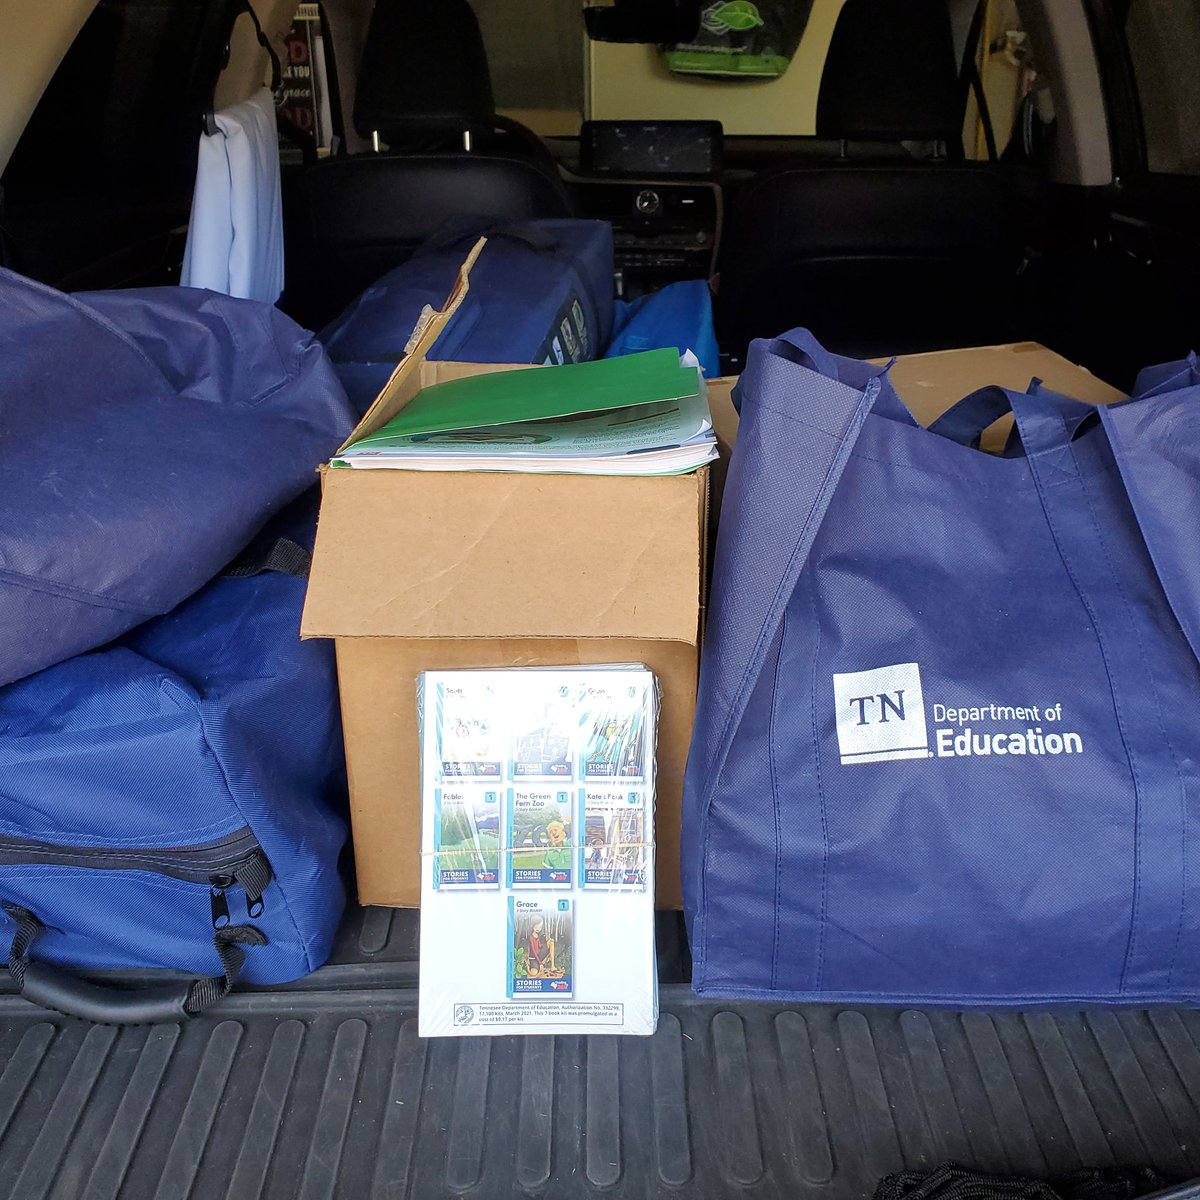 All packed up and heading out to celebrate #earlyliteracy at a  #communityevent. #Reading360 @TNedu
#Juneteenth2023 
#communityengagement